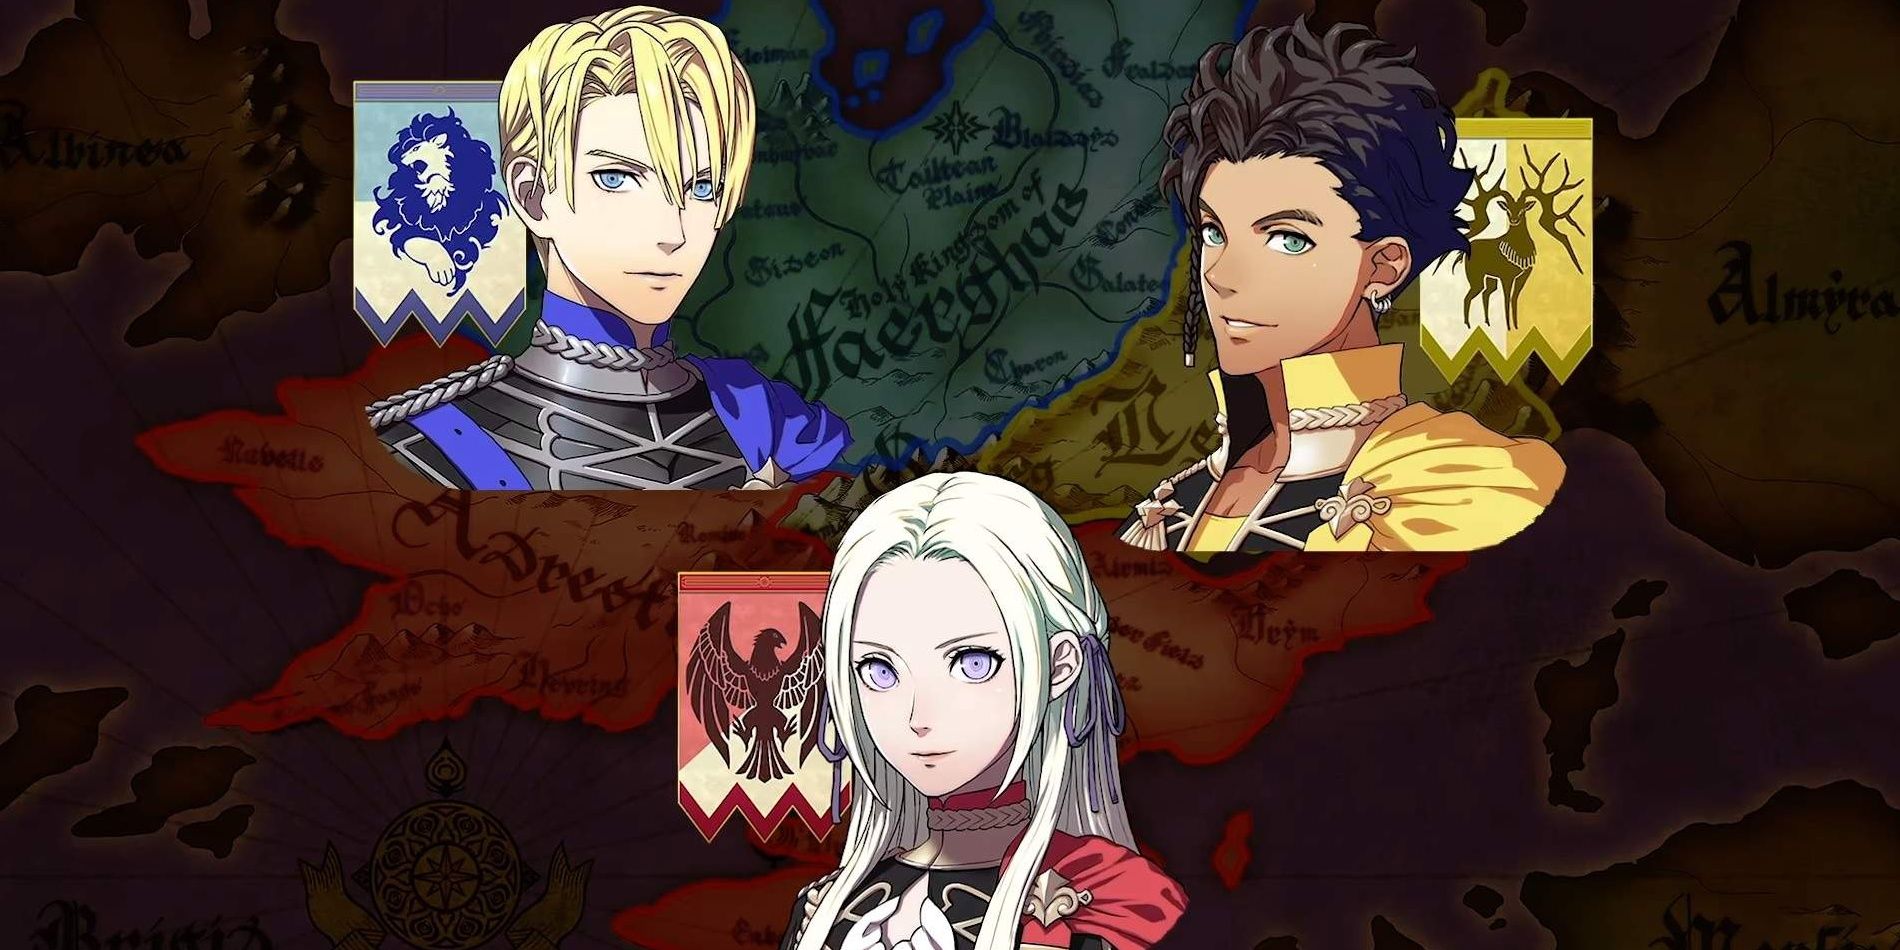 Fire Emblem: Three Houses made me care about a character in the most  unexpected way